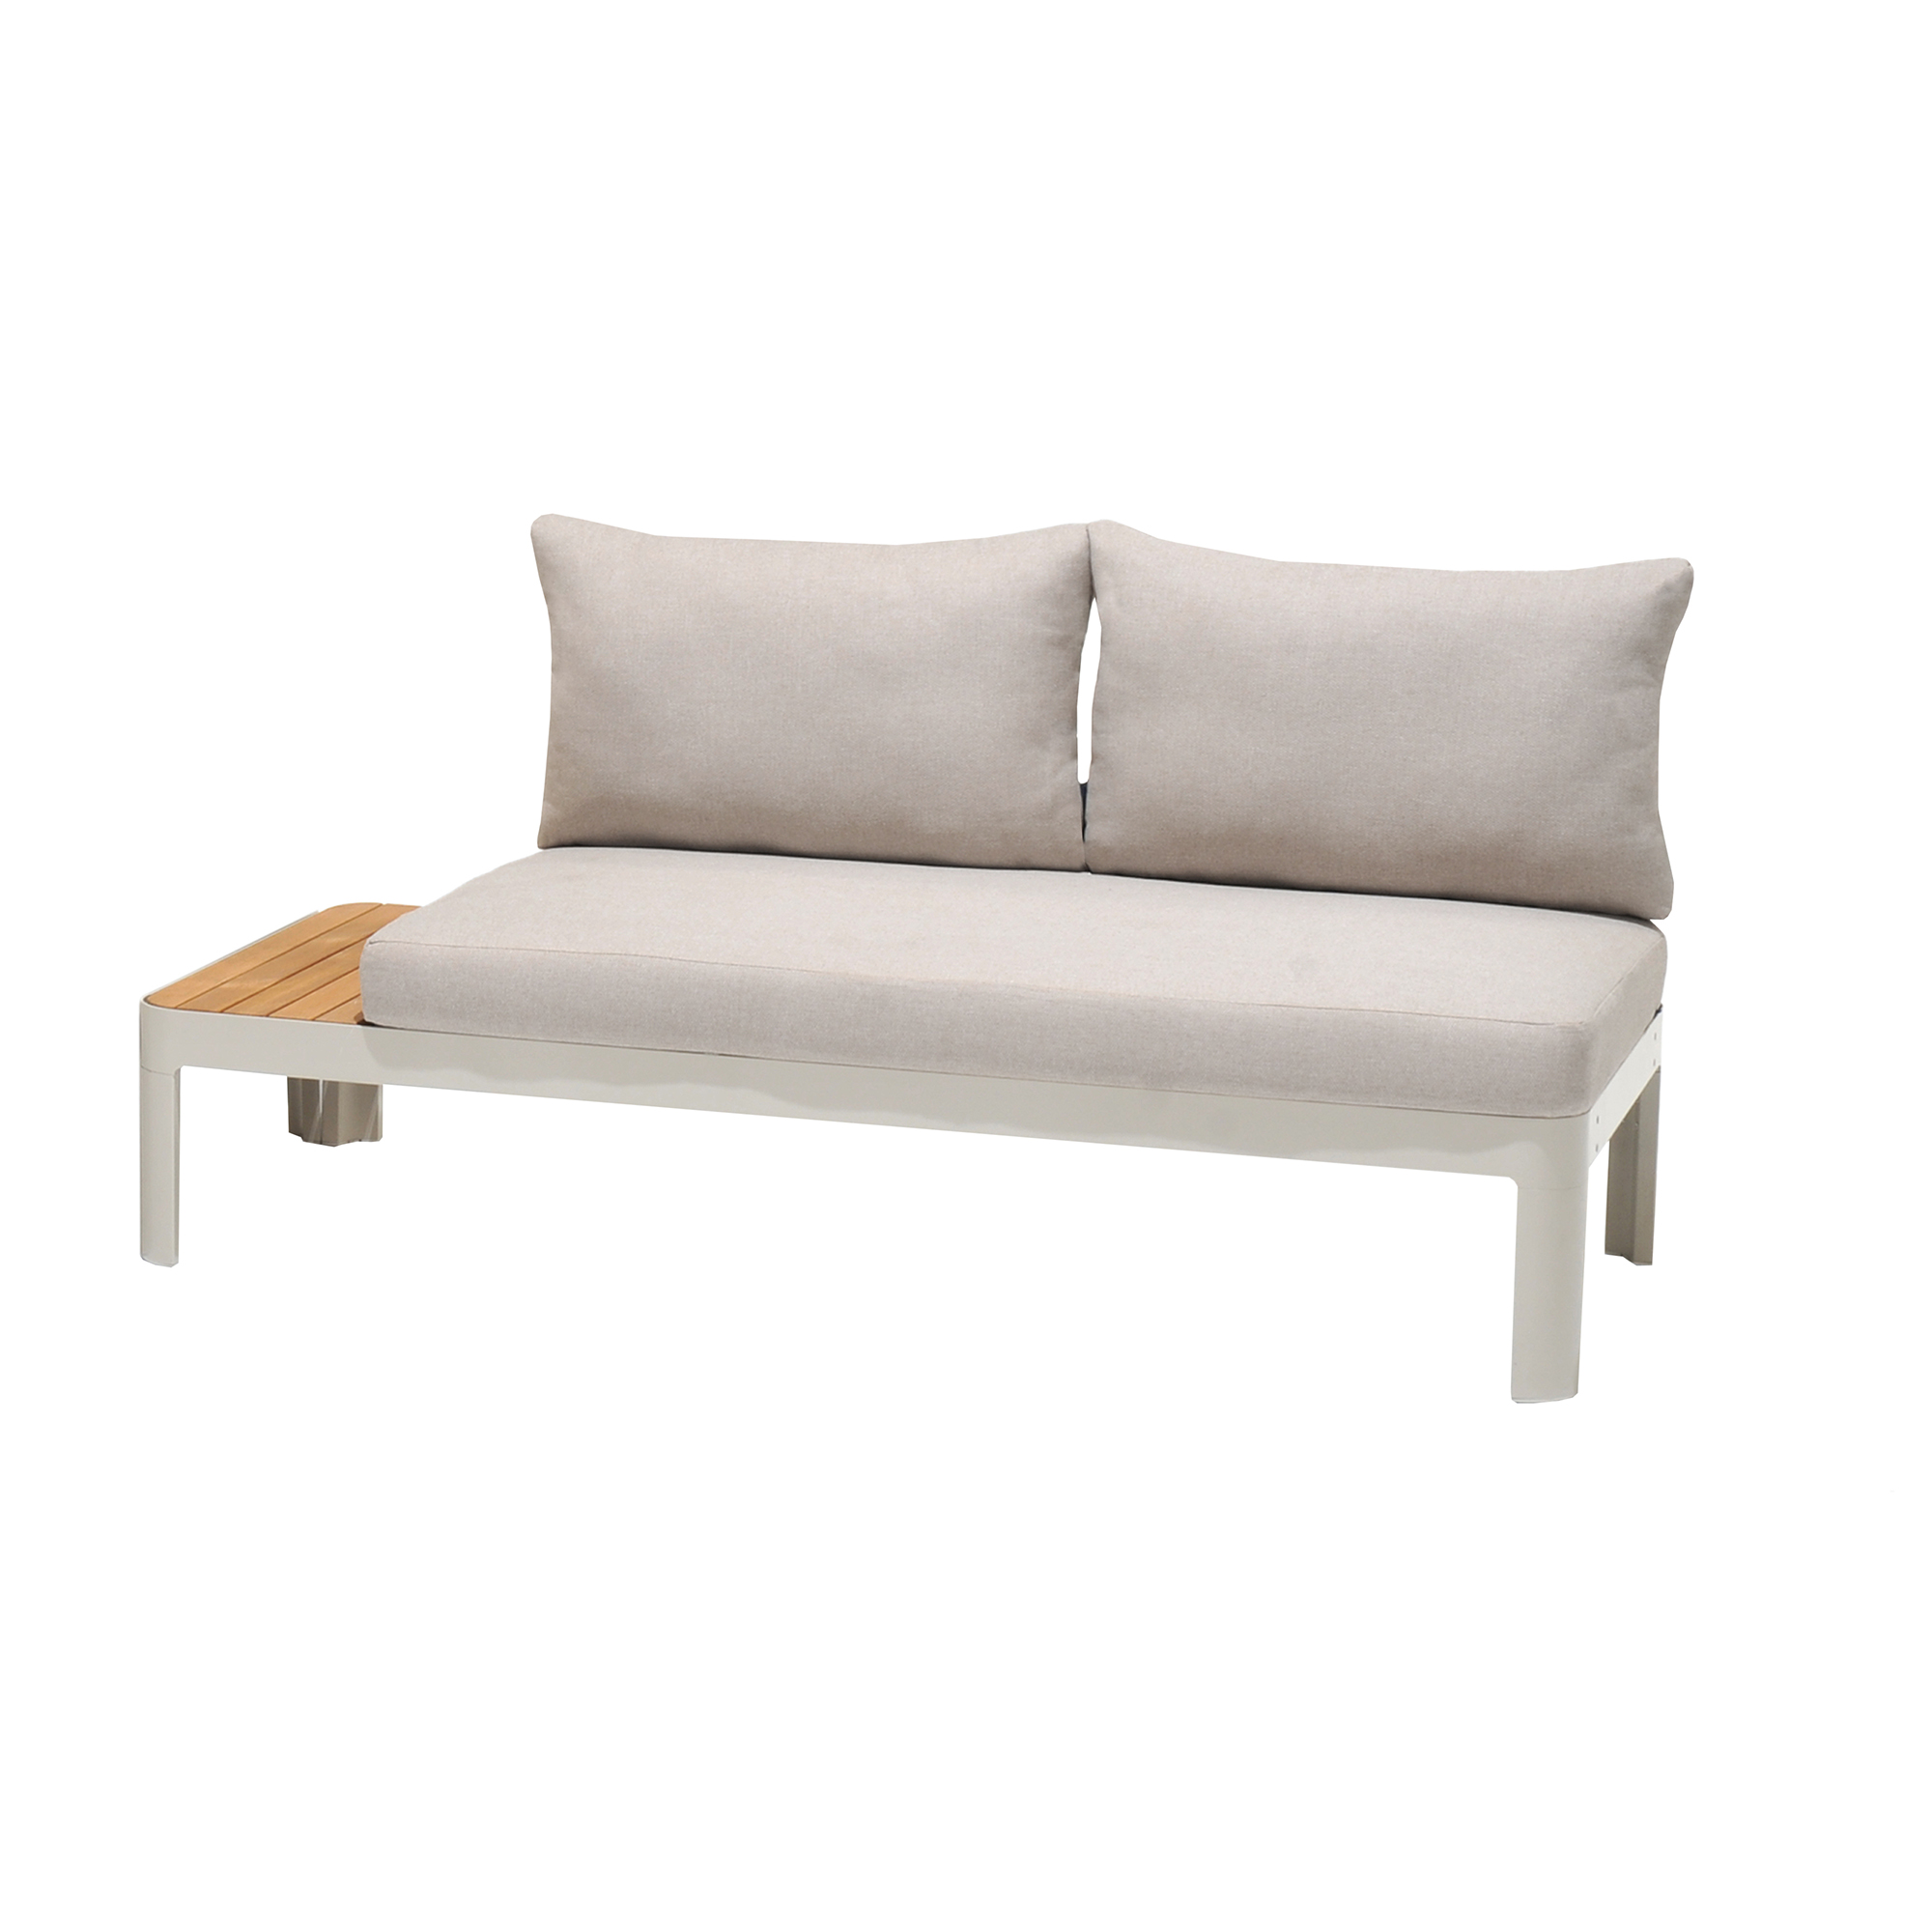 Portals Outdoor 2 Piece Sofa Set in Light Matte Sand Finish with Beige Cushions and Natural Teak Wood Accent - image 4 of 6